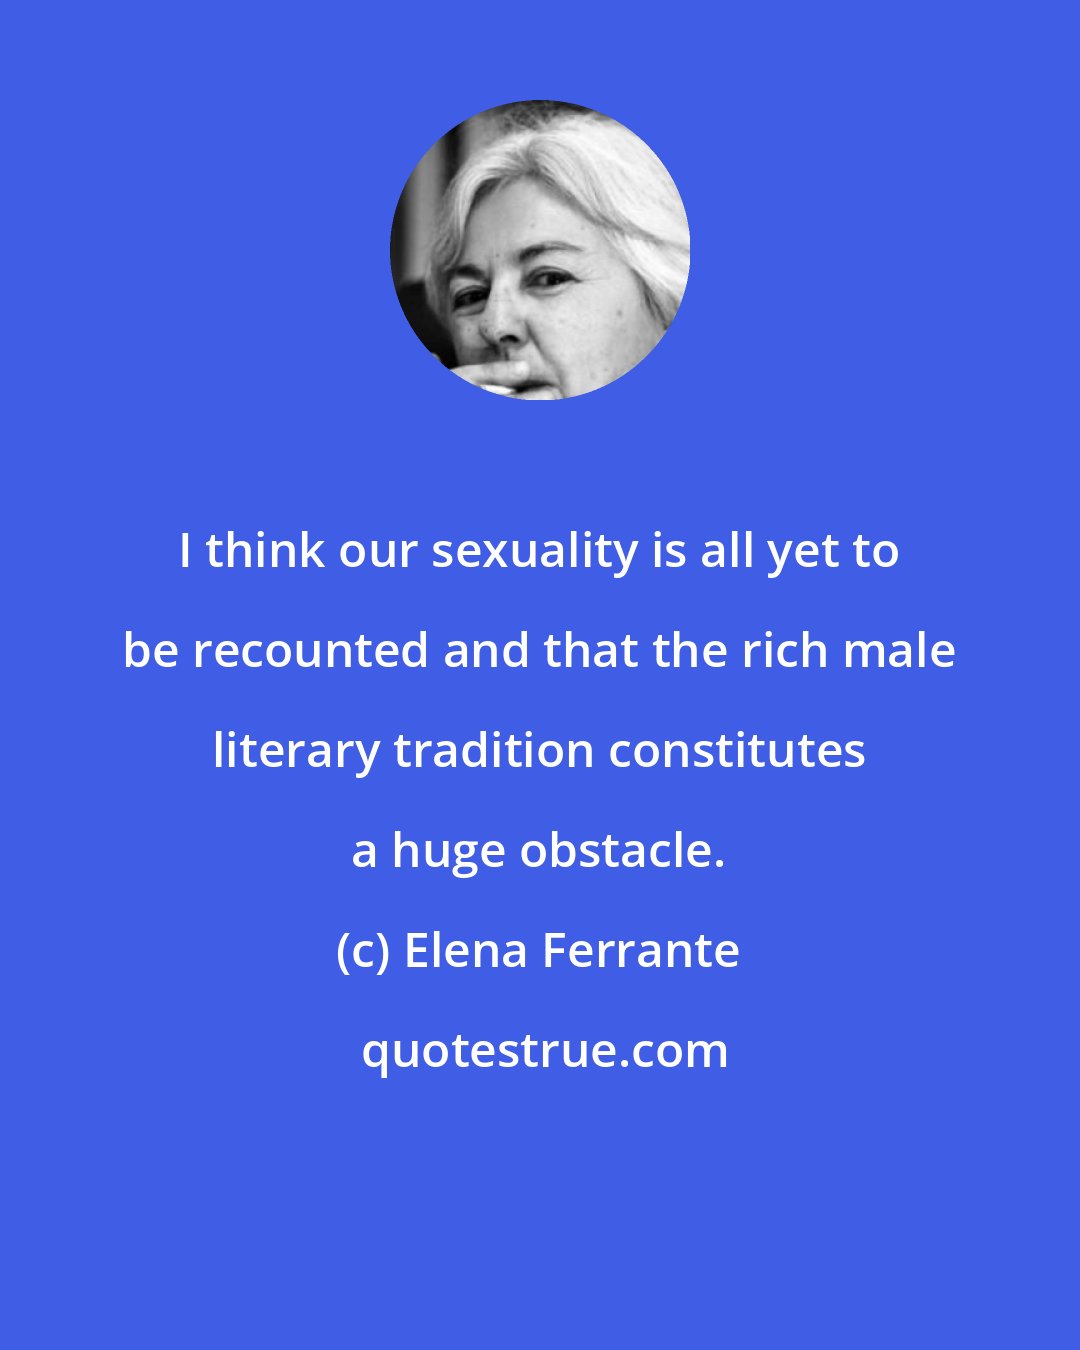 Elena Ferrante: I think our sexuality is all yet to be recounted and that the rich male literary tradition constitutes a huge obstacle.